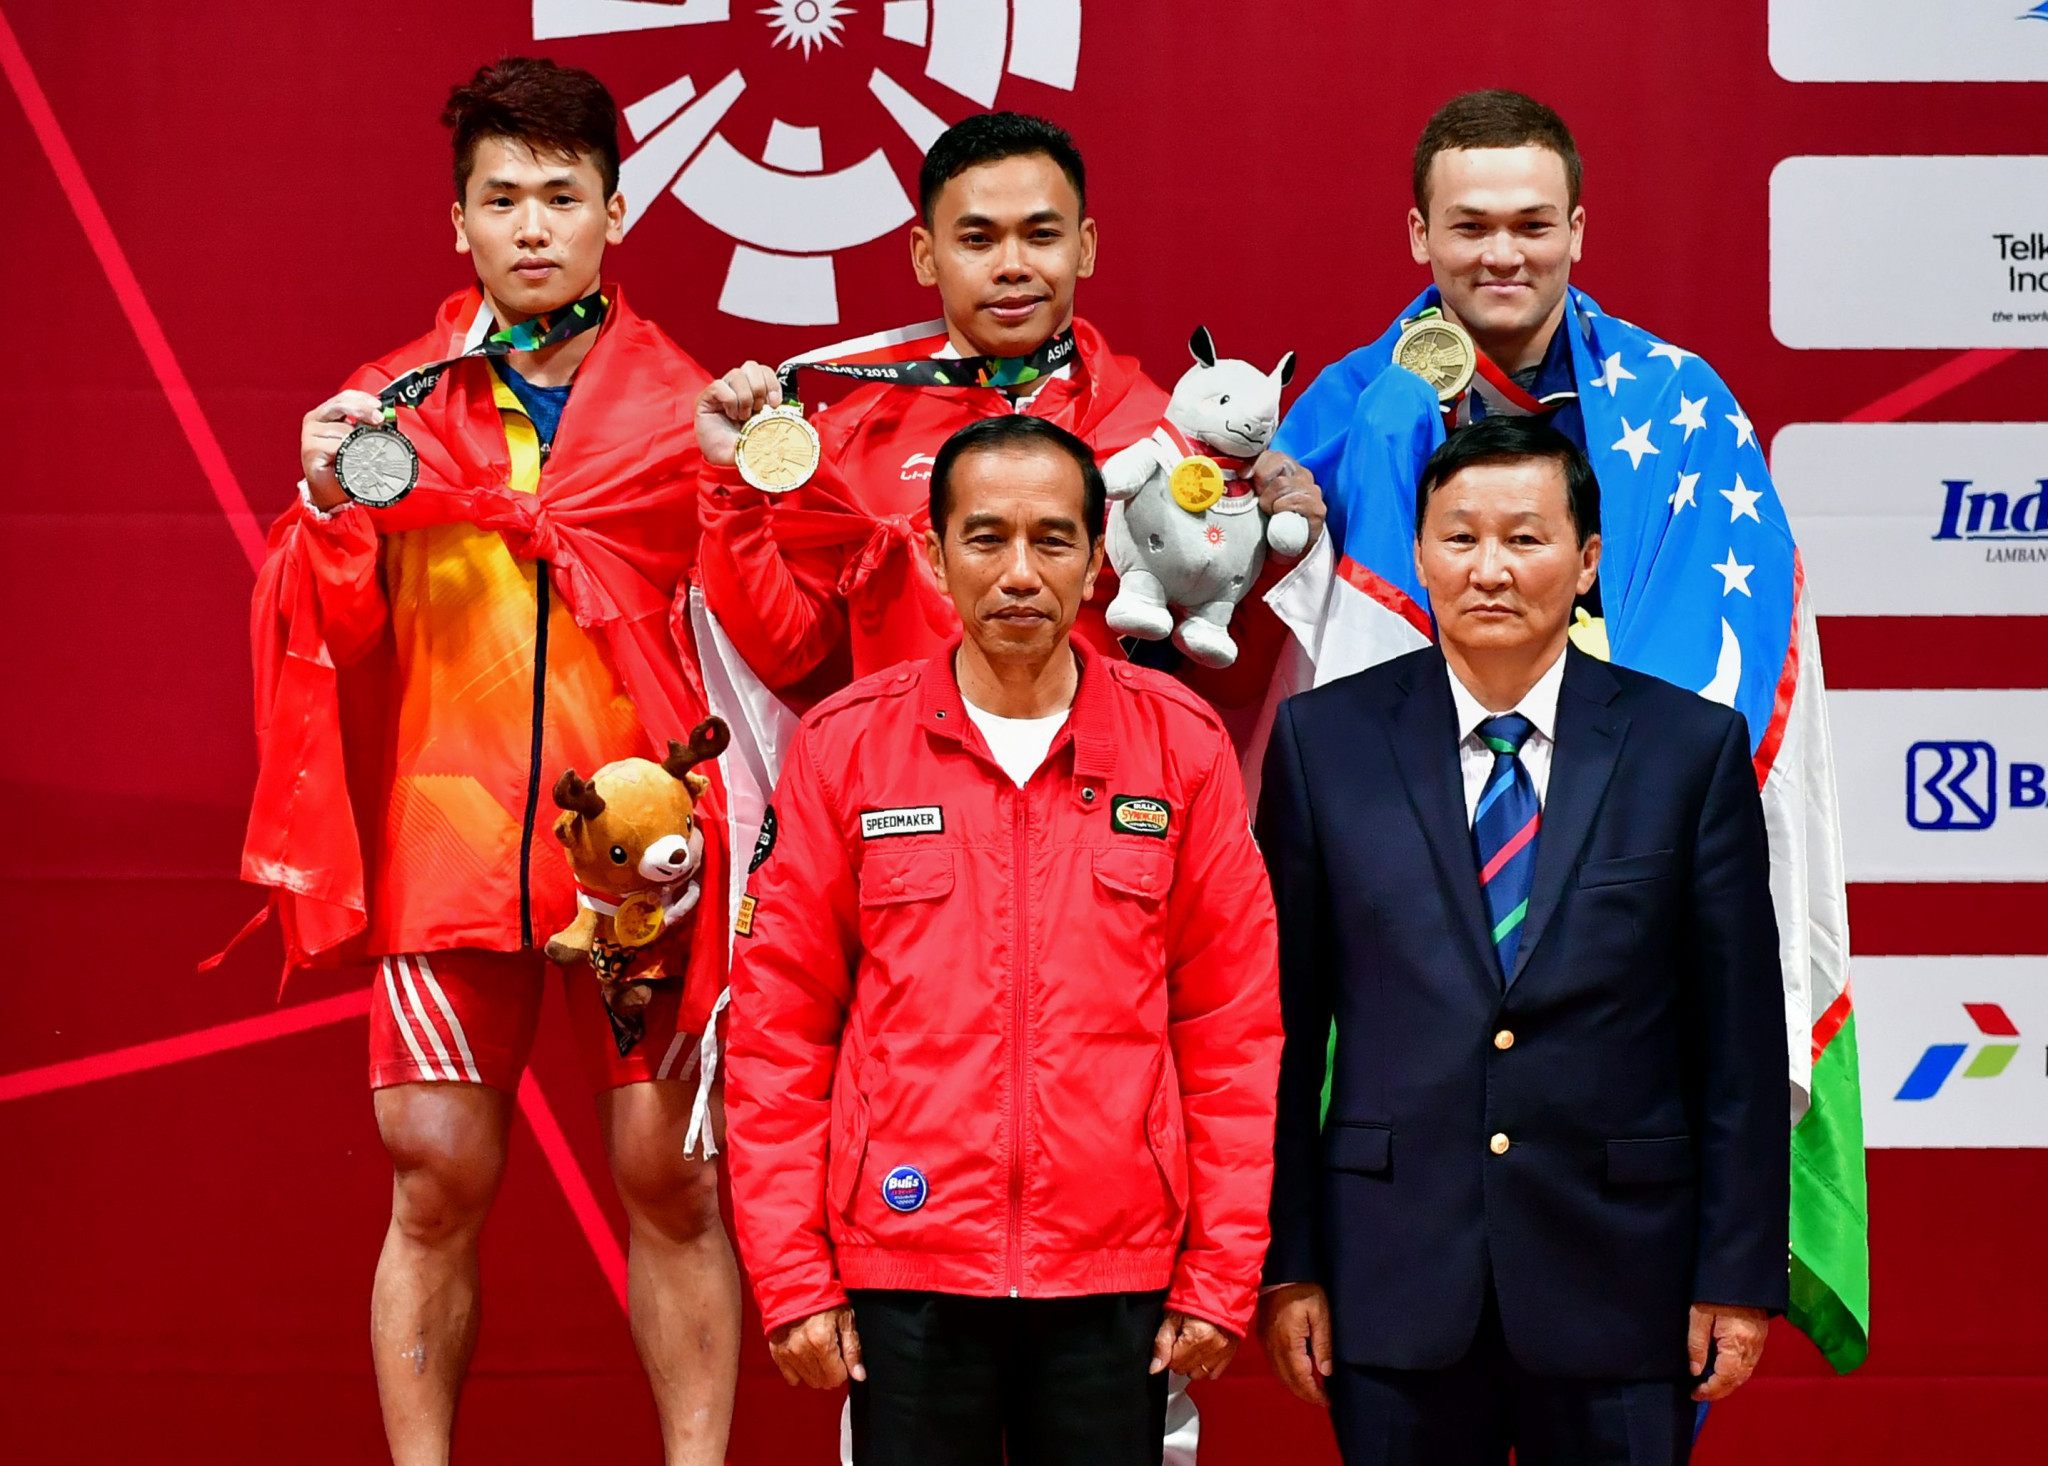 Indonesia President watches on as home favourite Irawan claims weightlifting gold at 2018 Asian Games